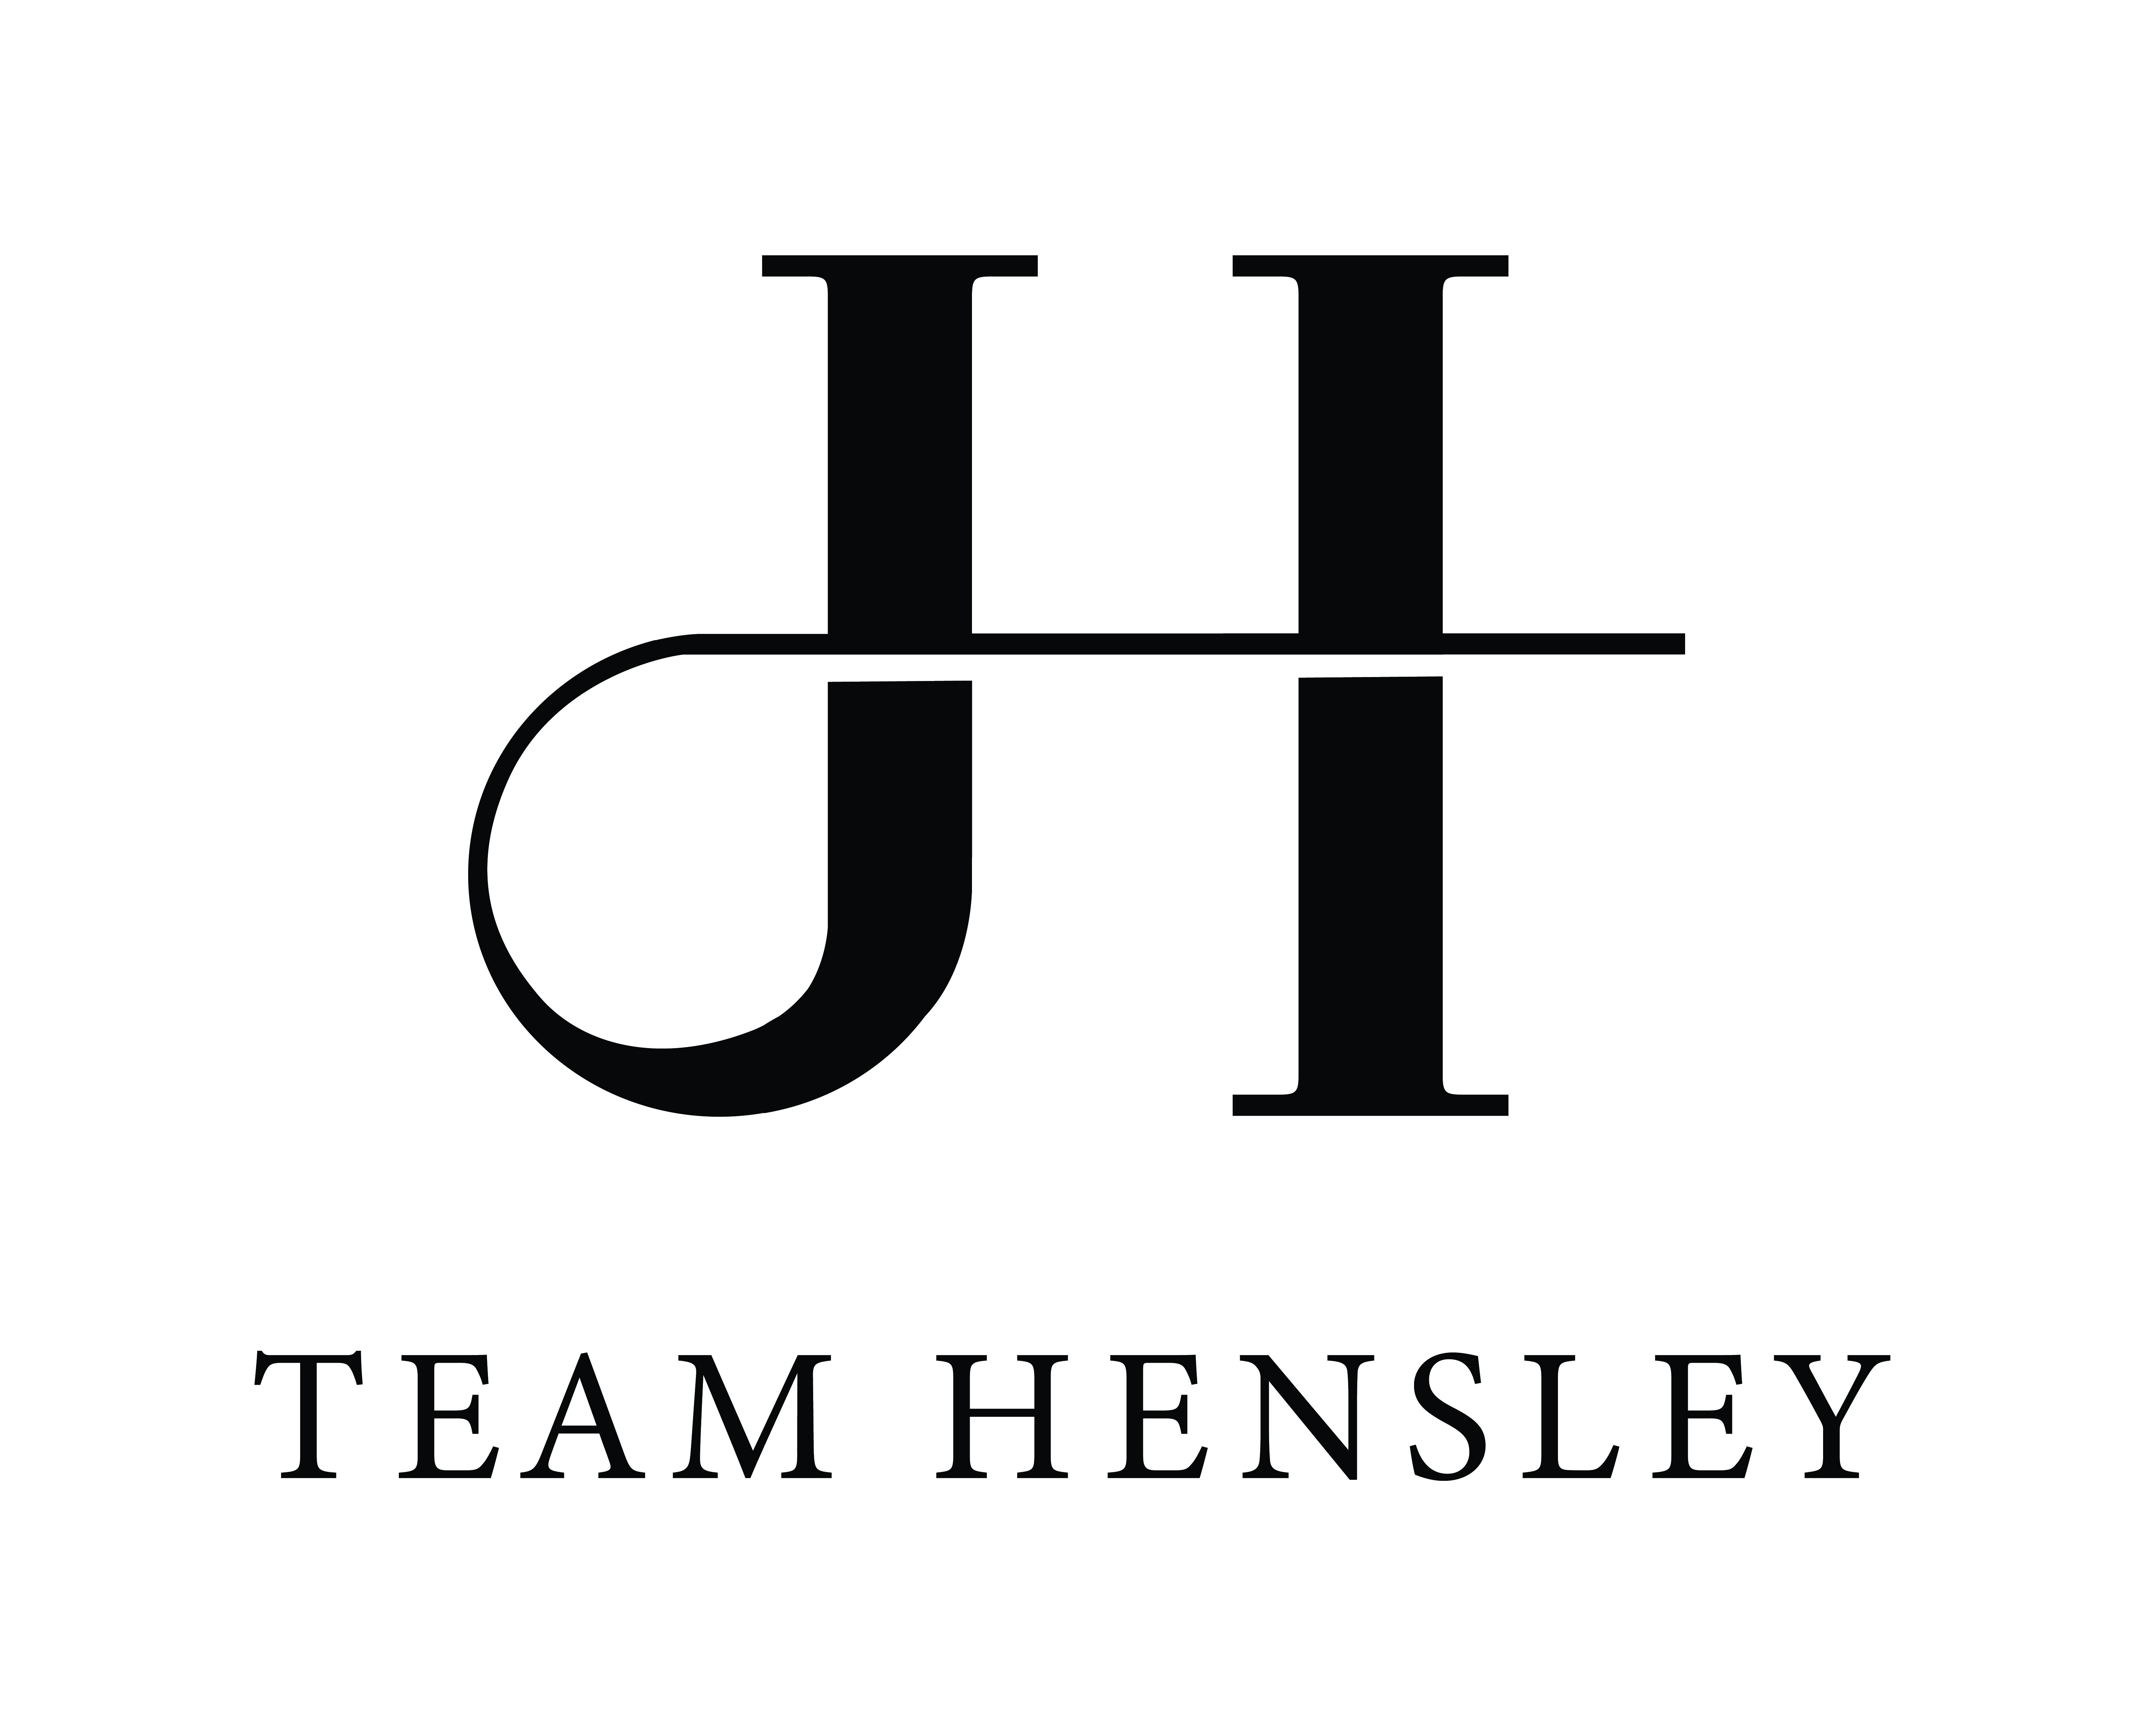 A text banner with the text TEAM HENSLEY